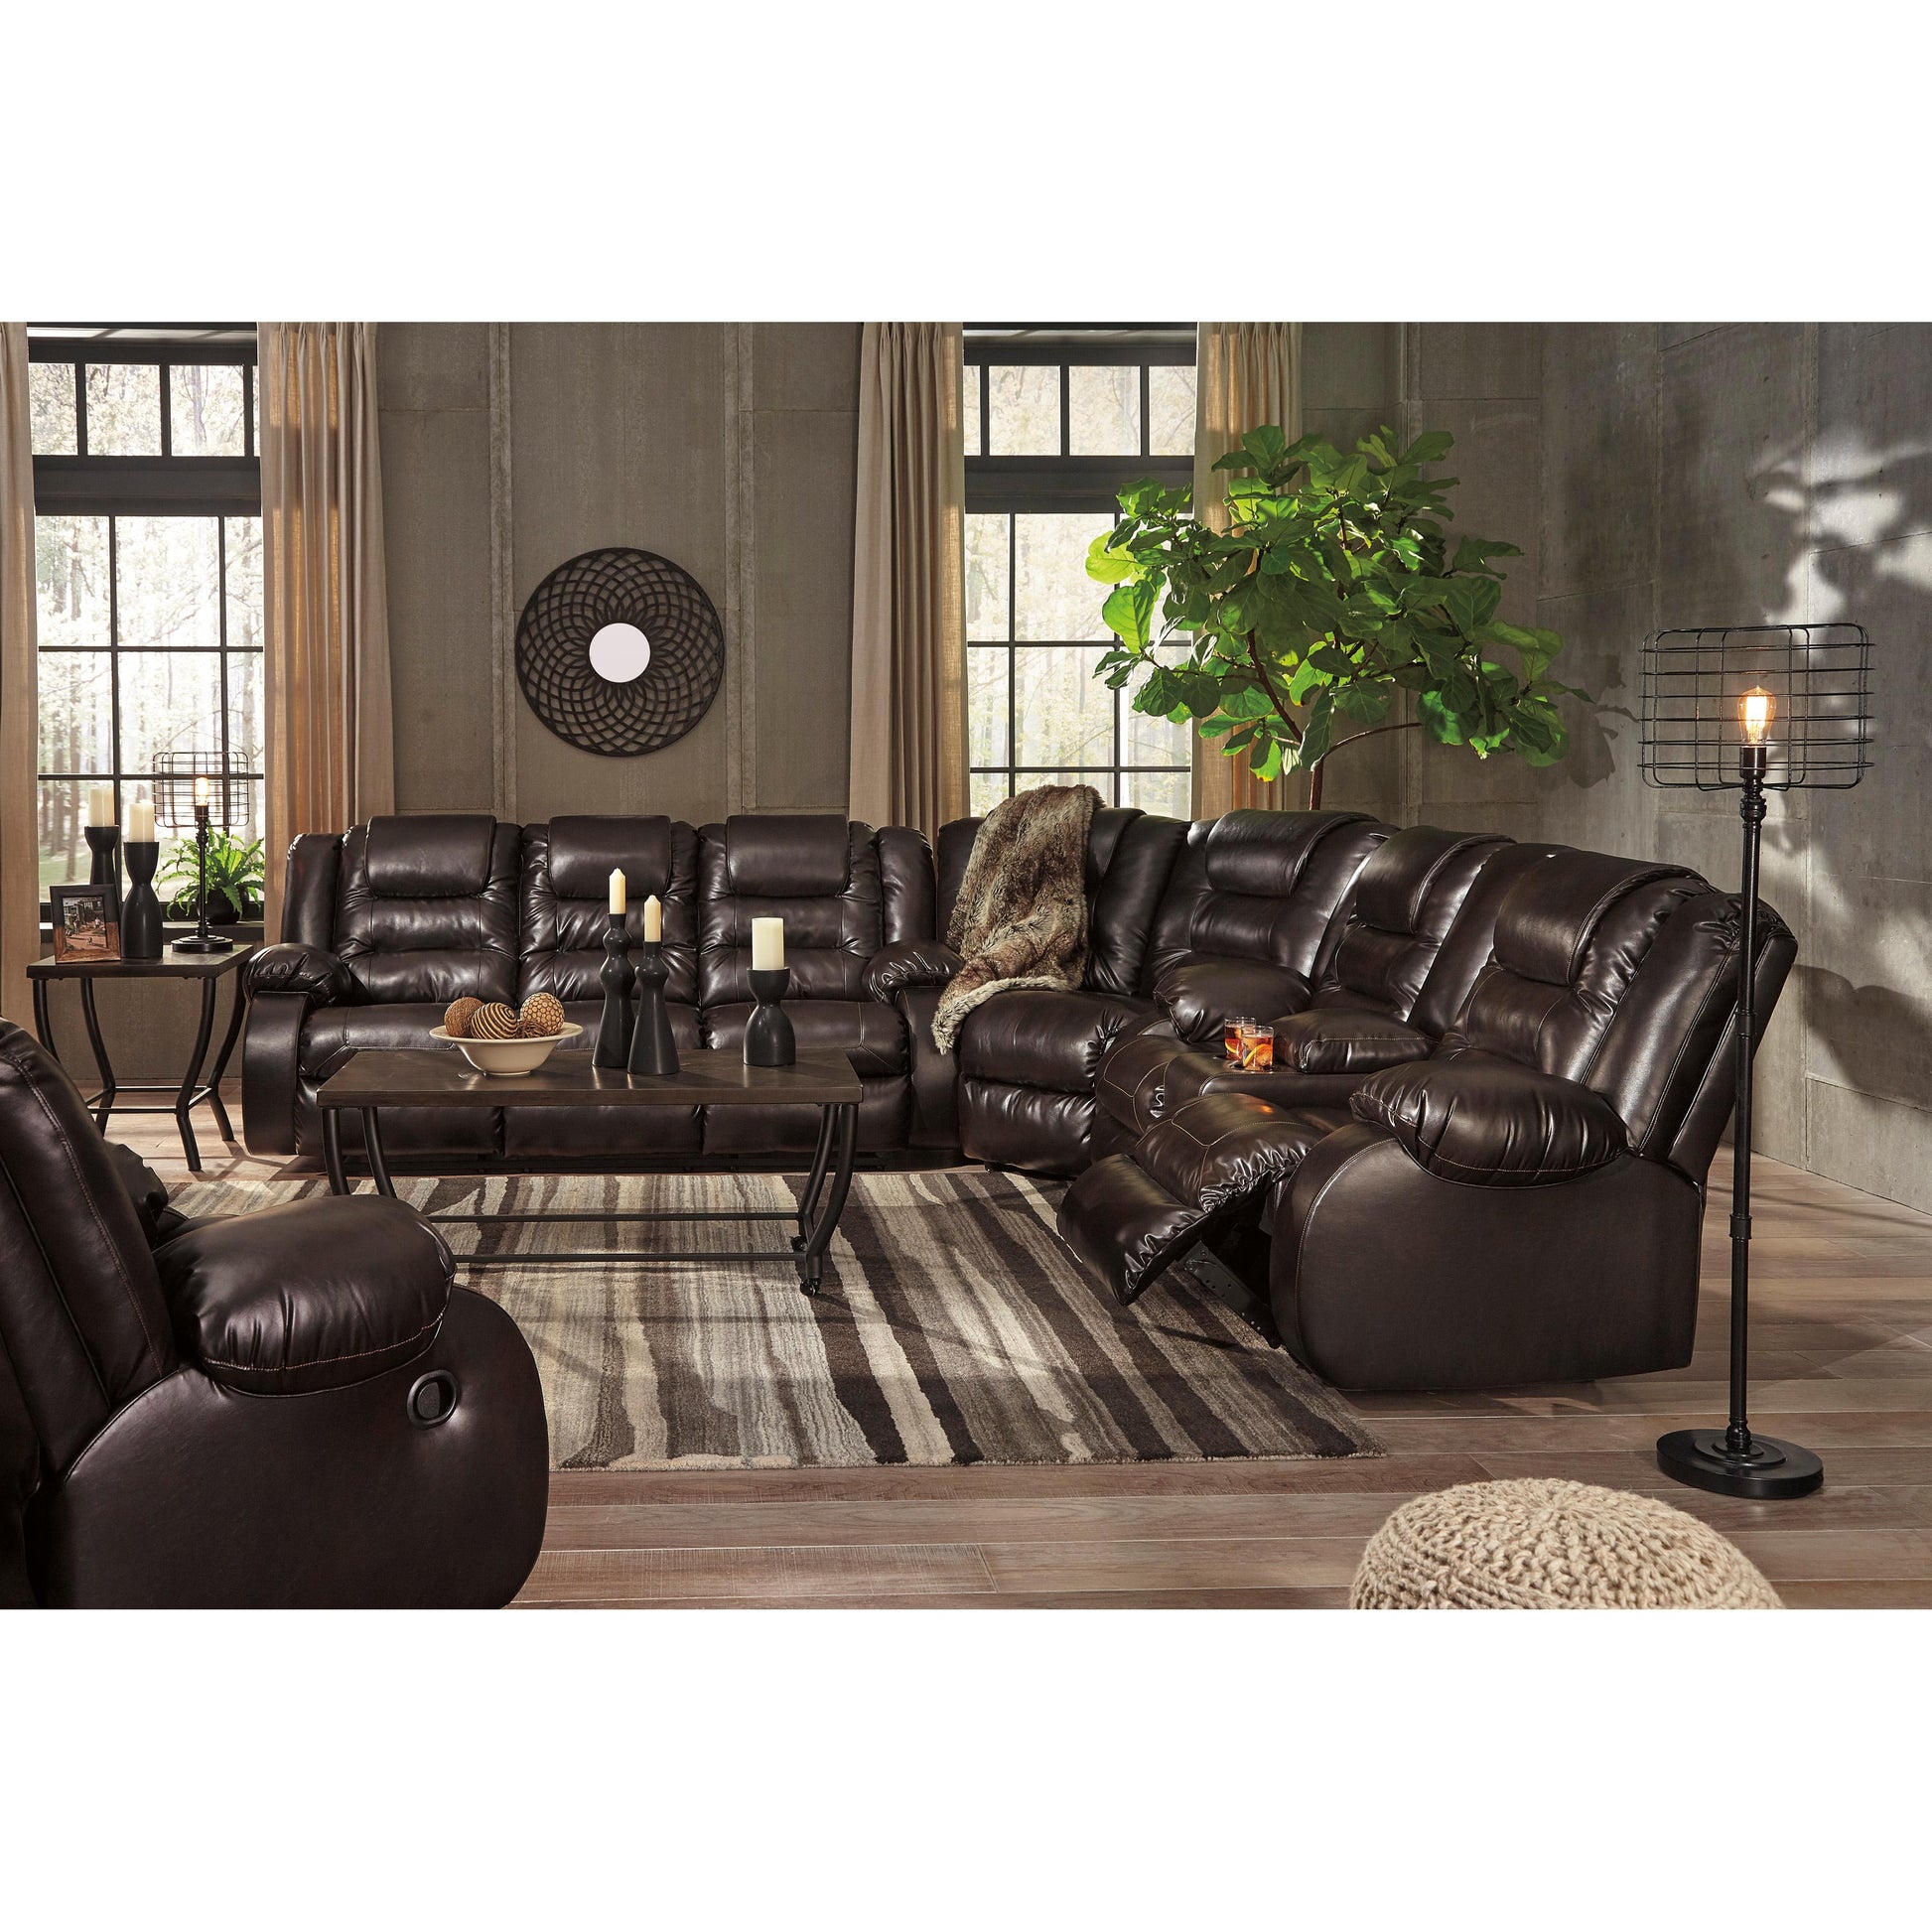 Signature Design by Ashley Vacherie Reclining Leather Look Sofa 7930788